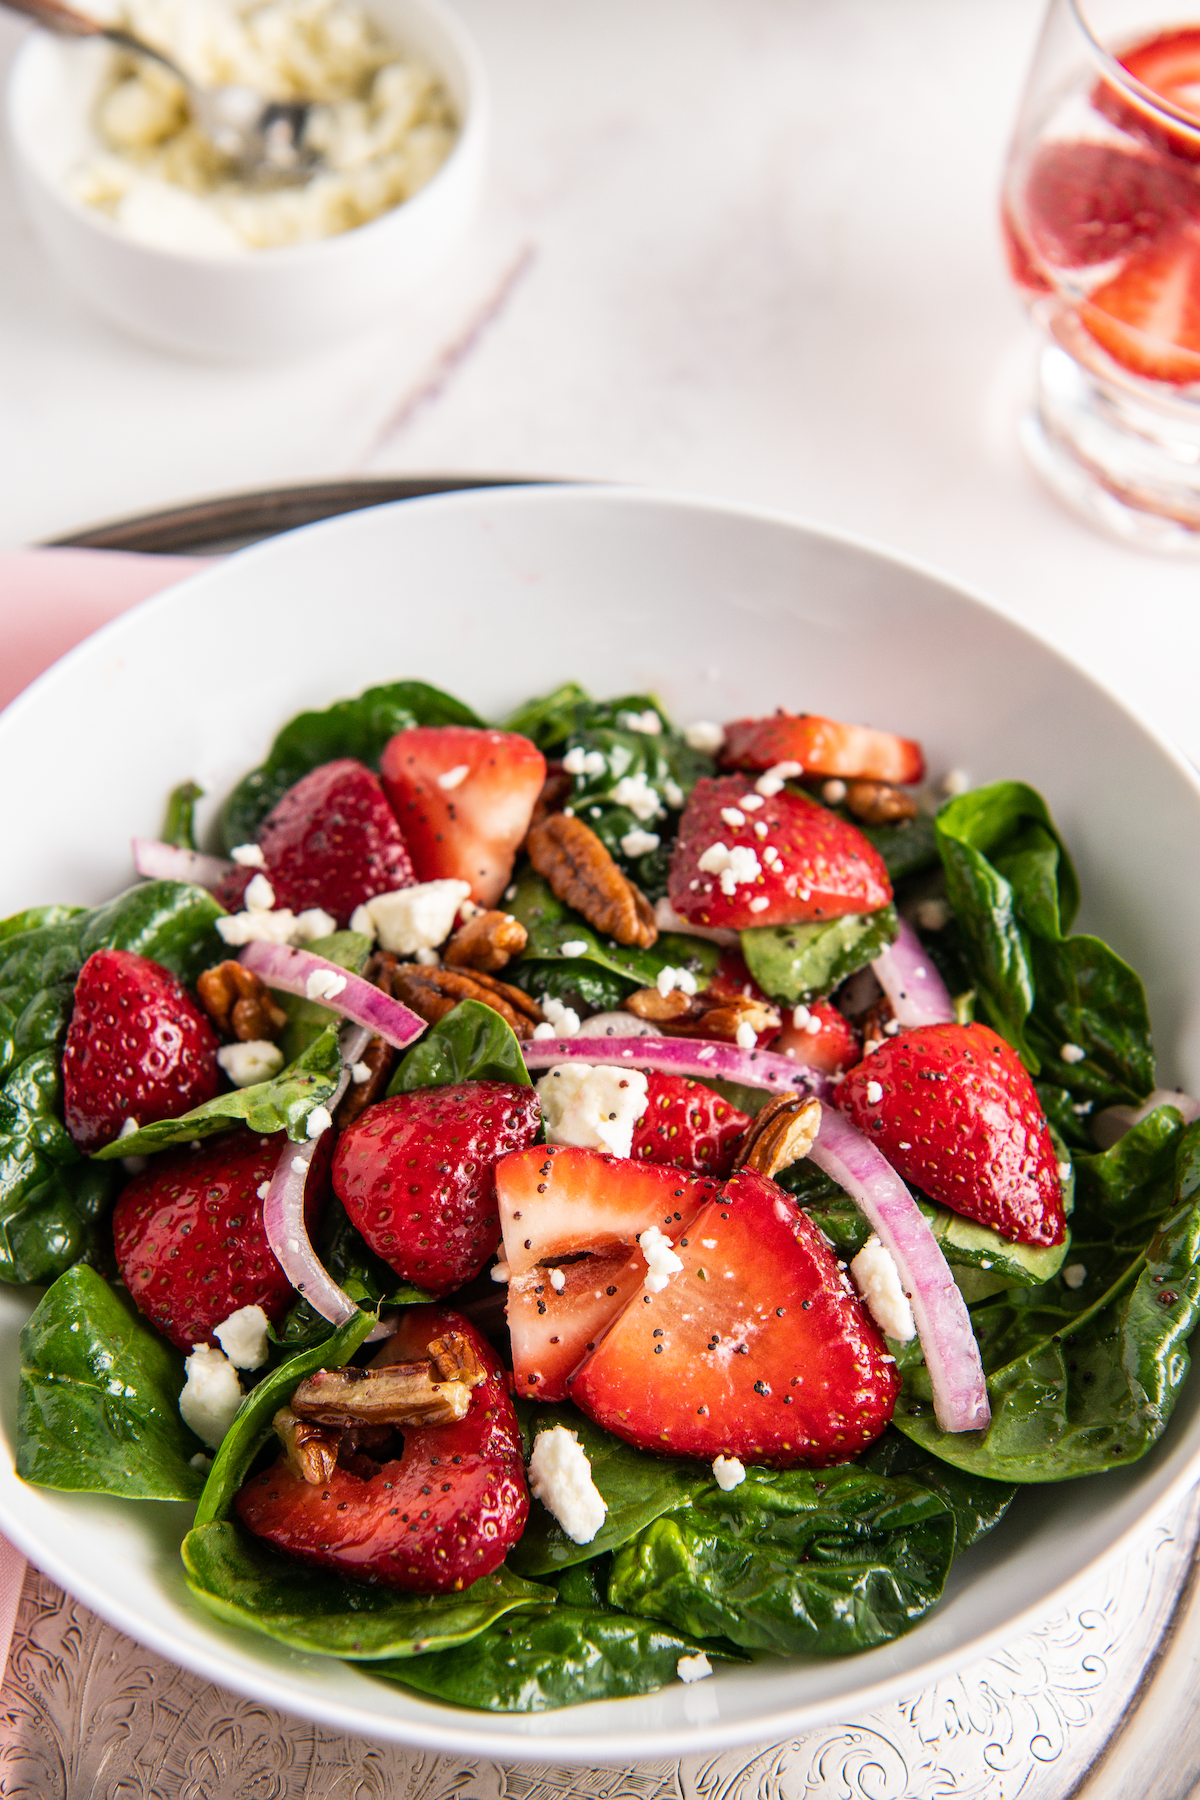 Strawberry salad with feta cheese, pecans, and baby spinach.